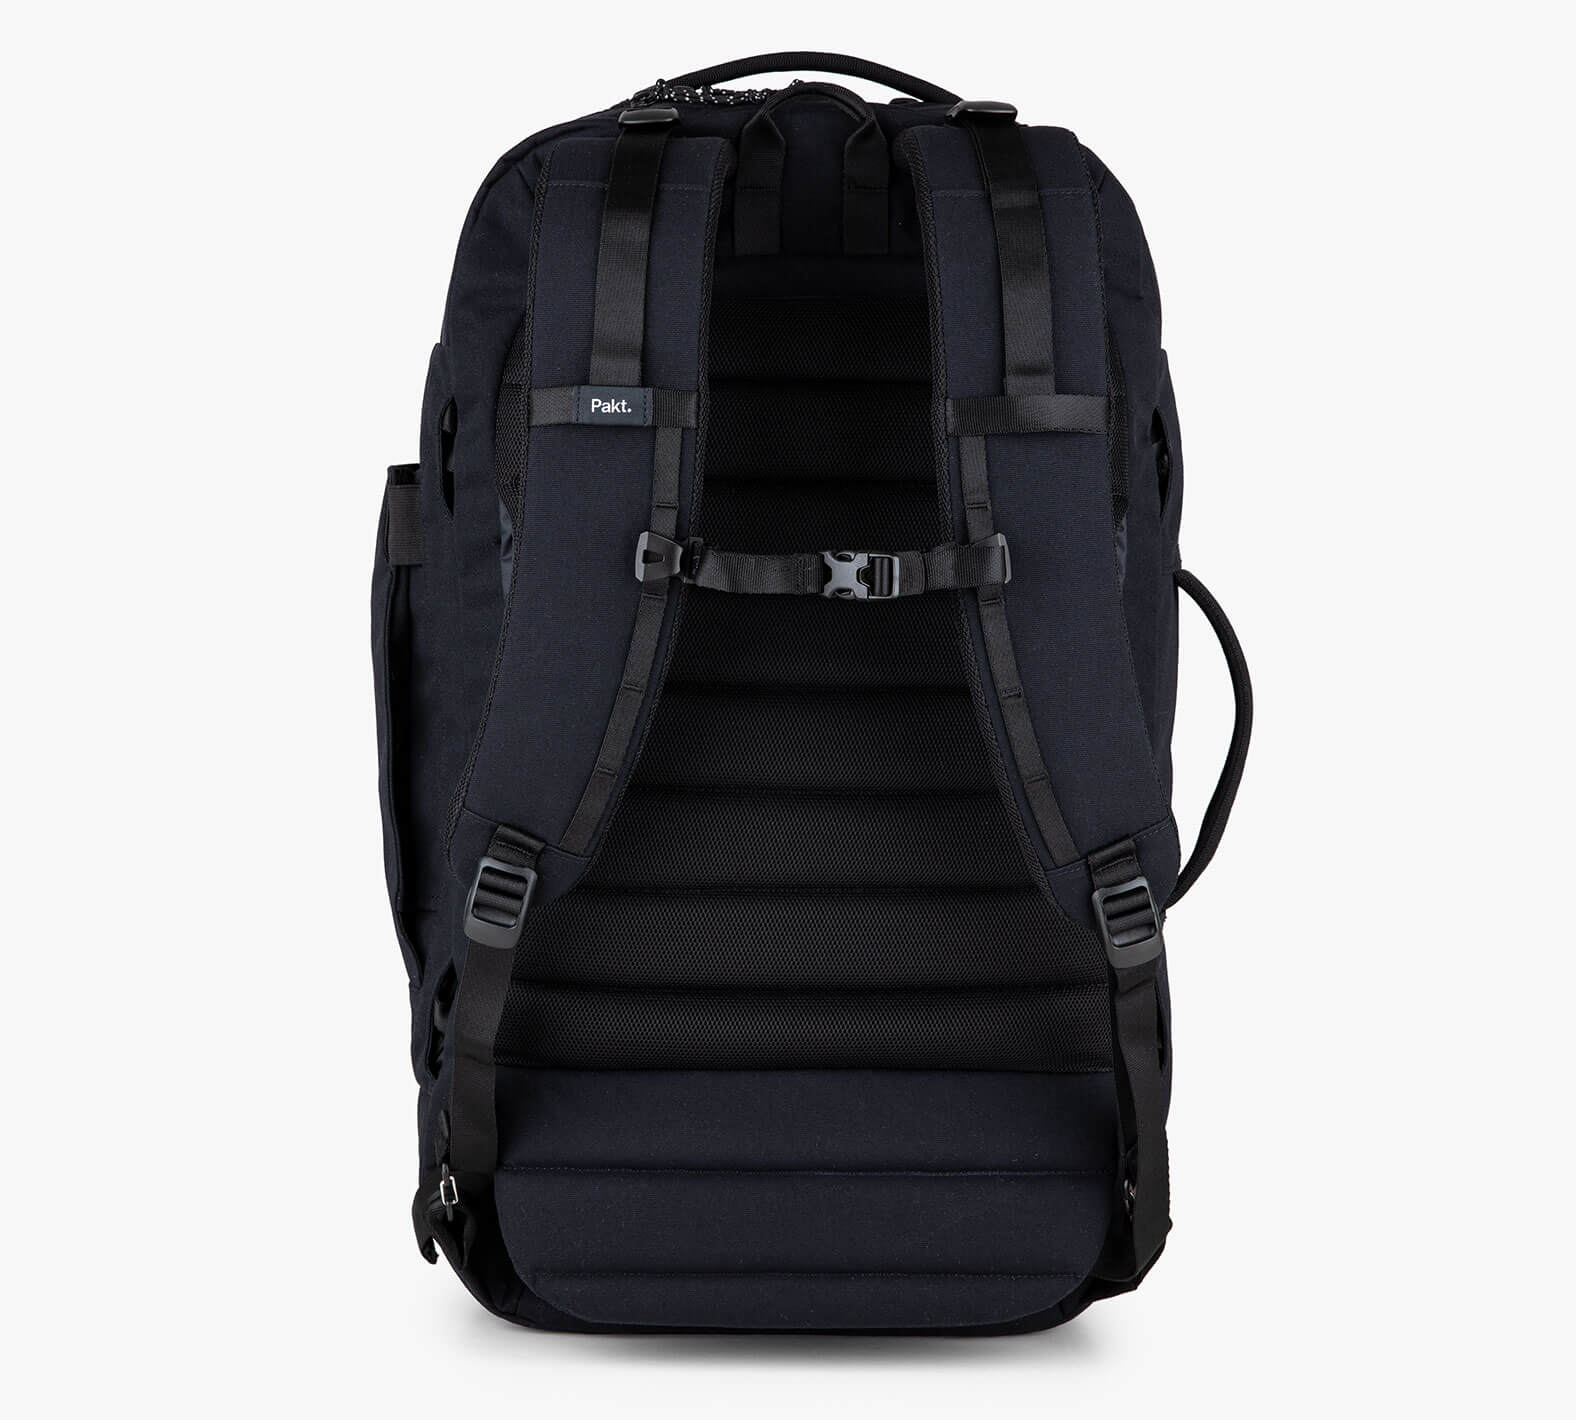 Black Travel Backpacks, Number Of Compartments: 3